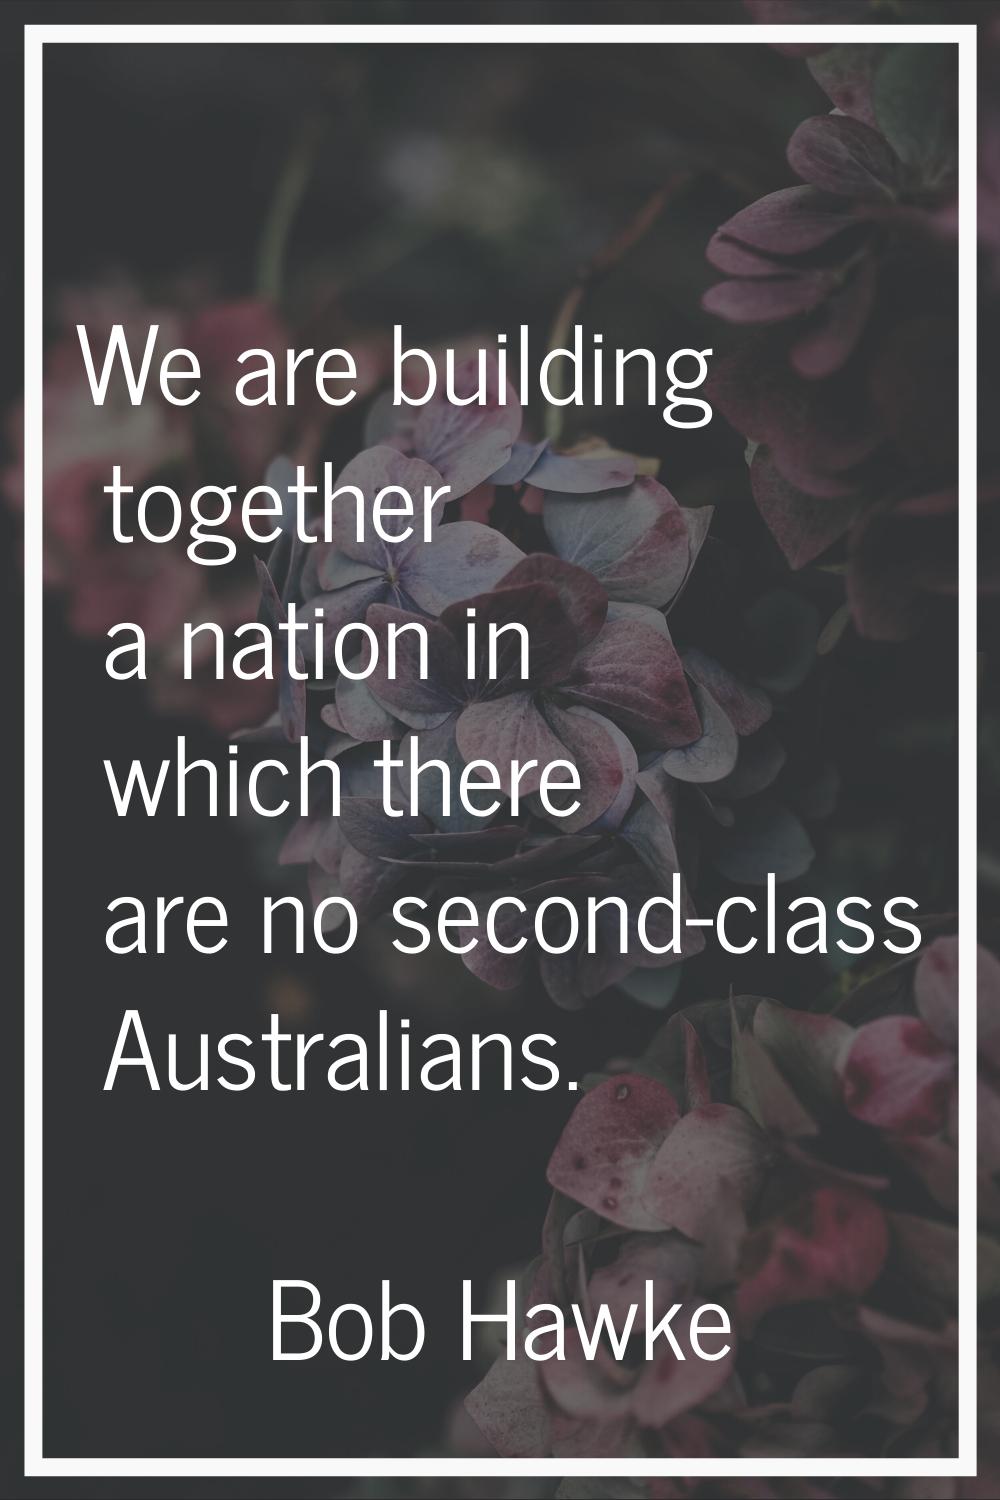 We are building together a nation in which there are no second-class Australians.